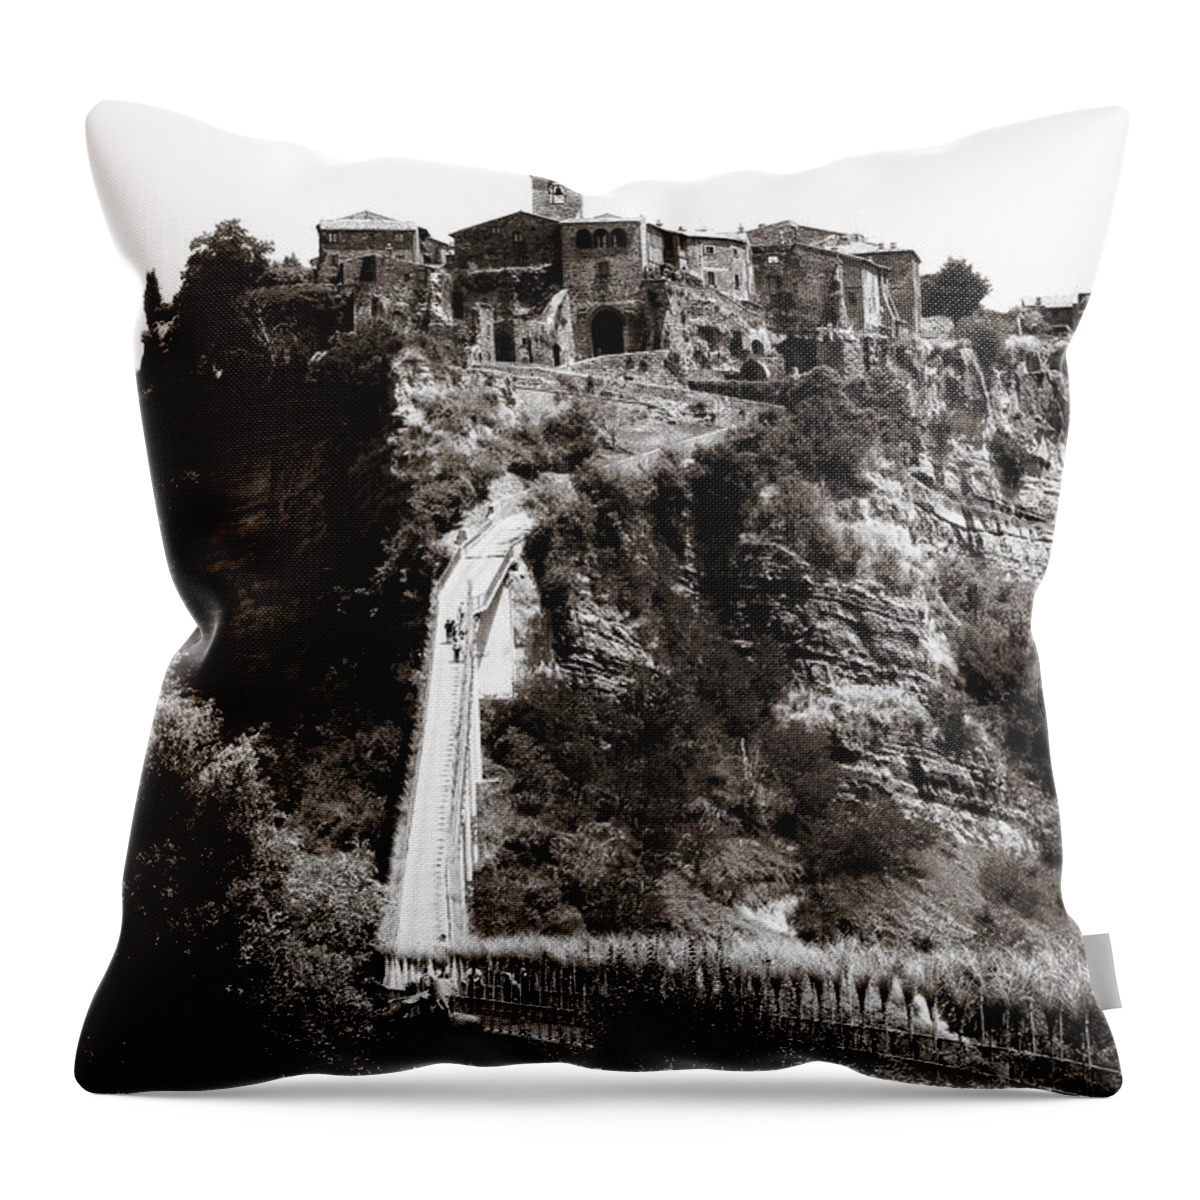 Castle Throw Pillow featuring the photograph Civita di Bagnoregio Italy by Deborah Scannell